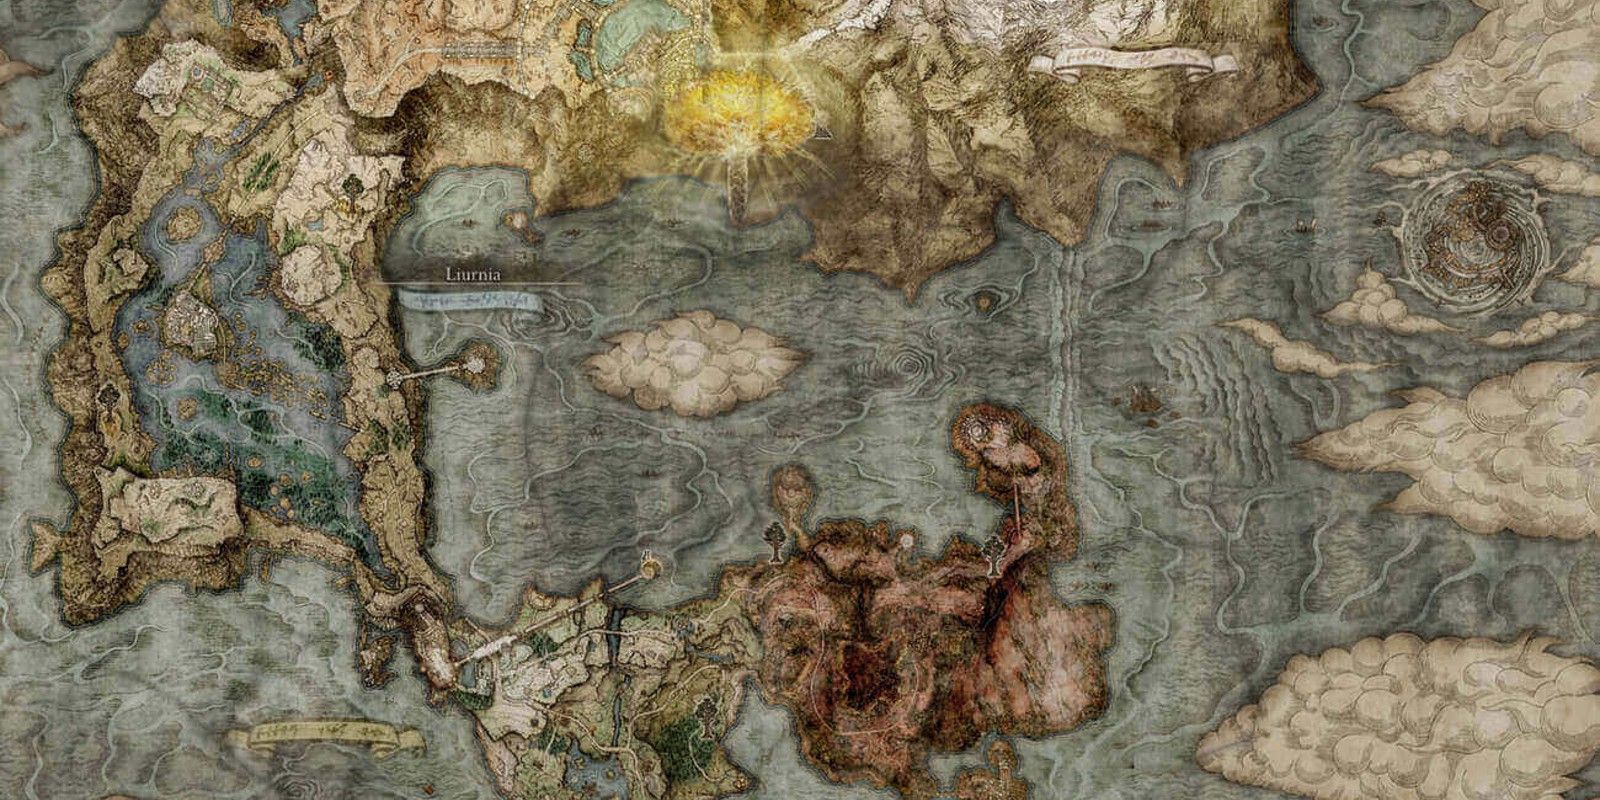 A colored image of The Lands Between map of Elden Ring, featuring a cloud in the center of the map.